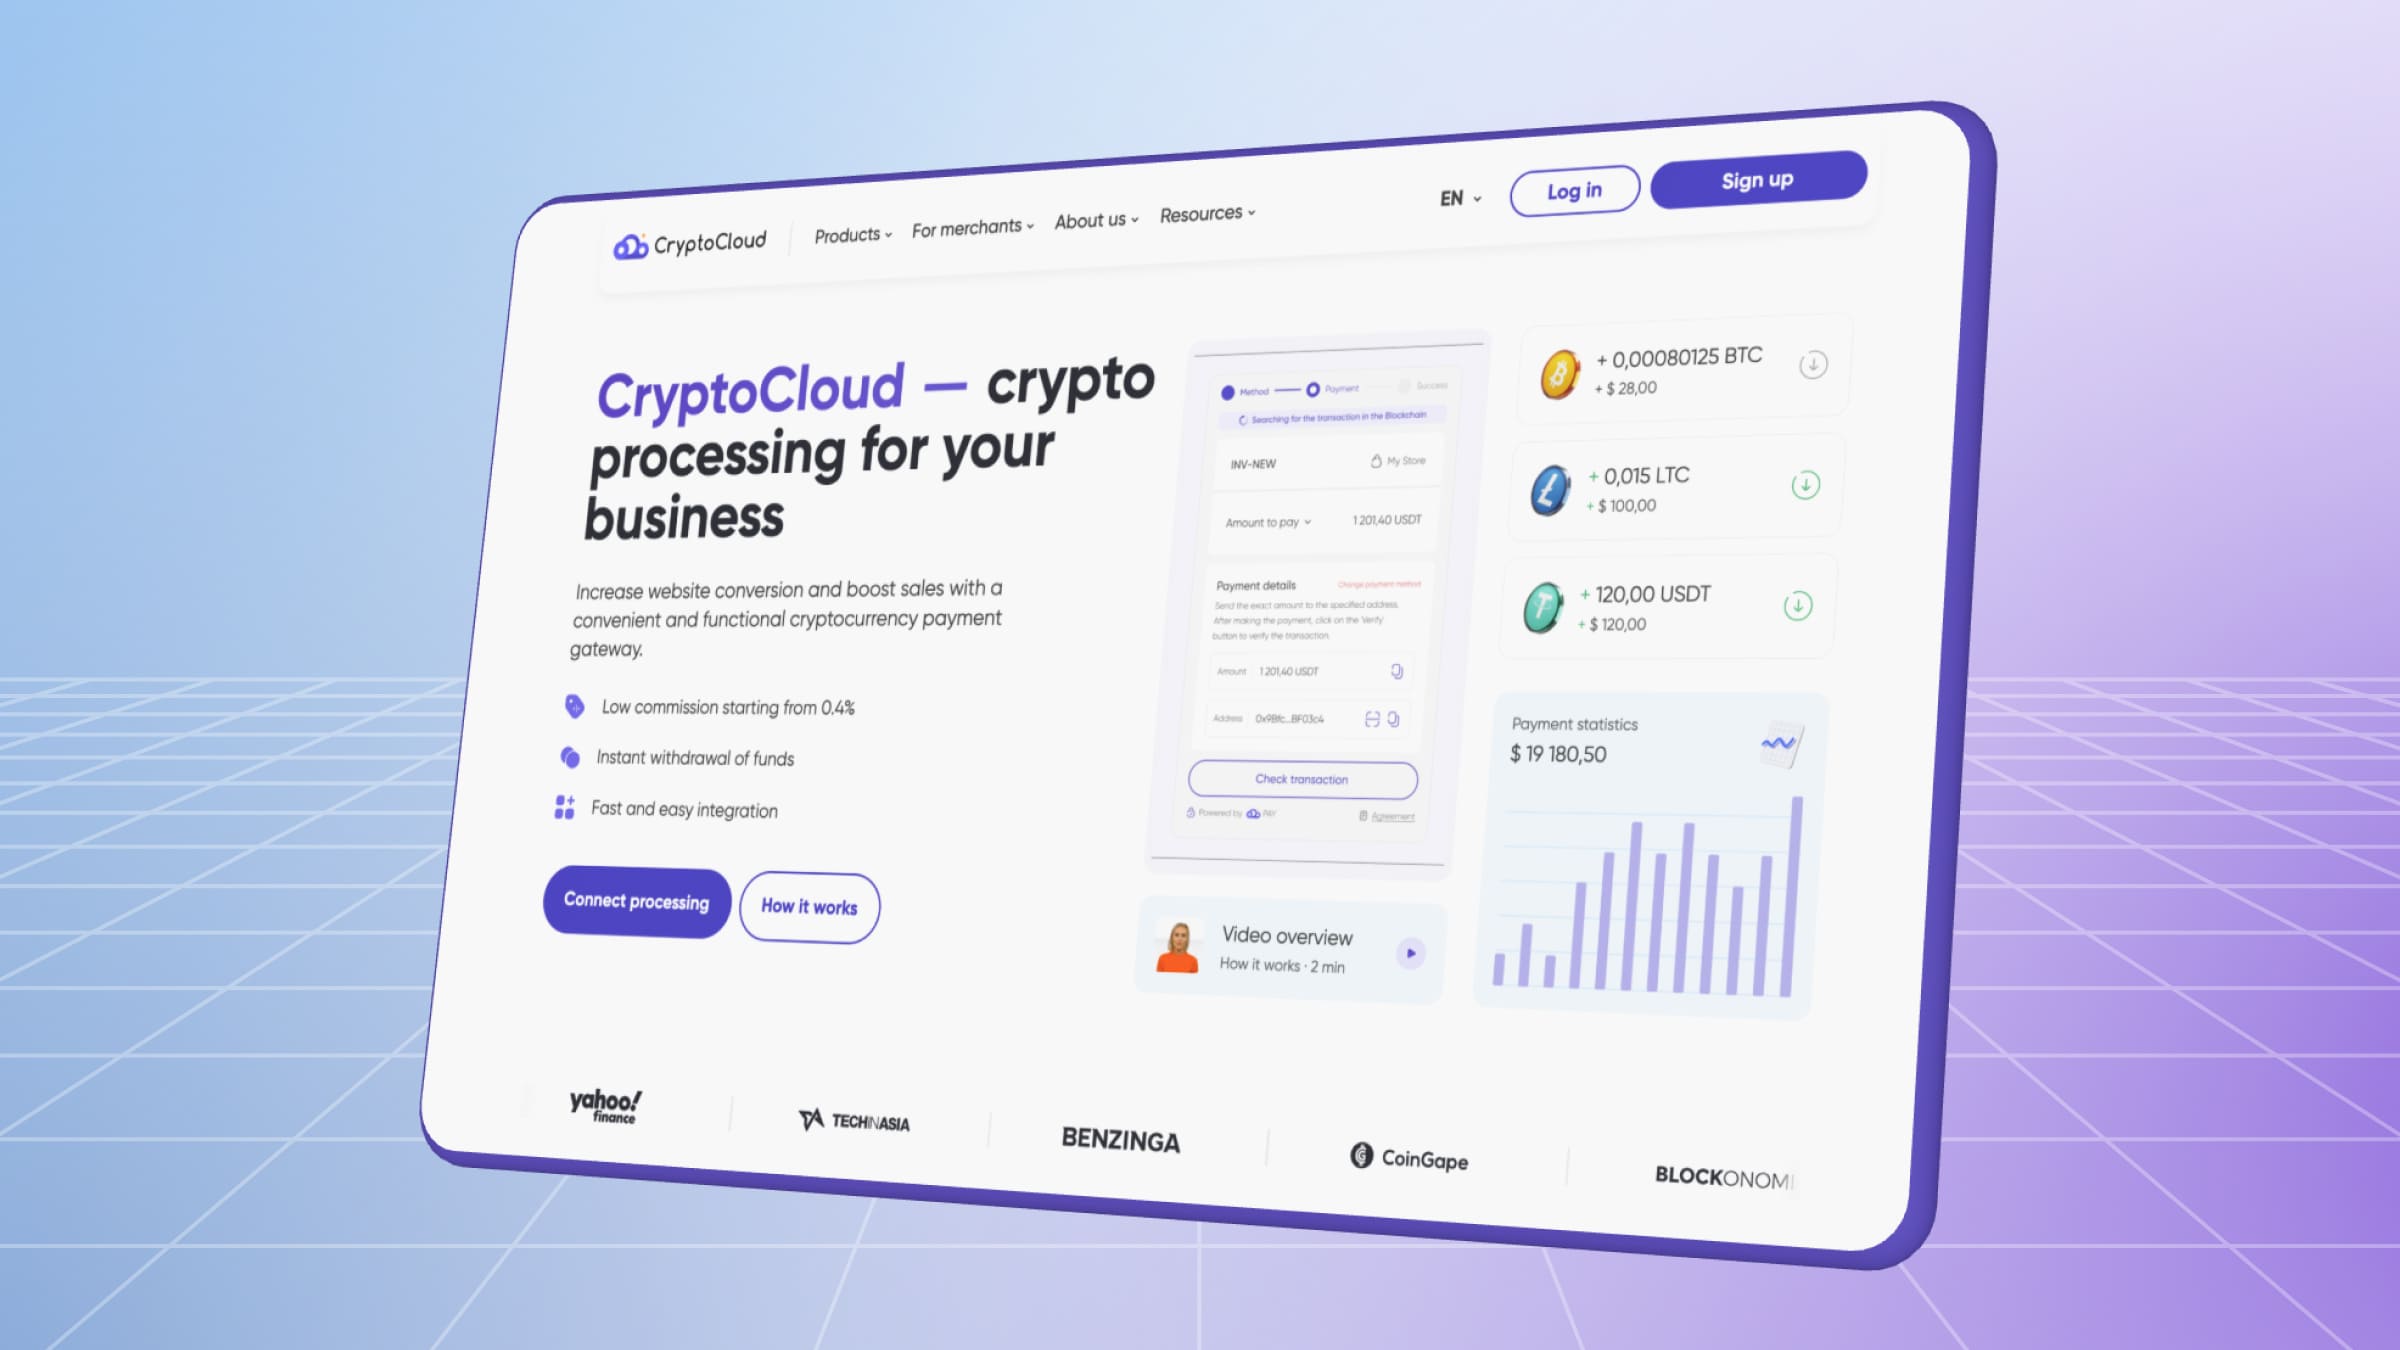 CryptoCloud is a cryptocurrency processor with low fees and high conversion checkout.